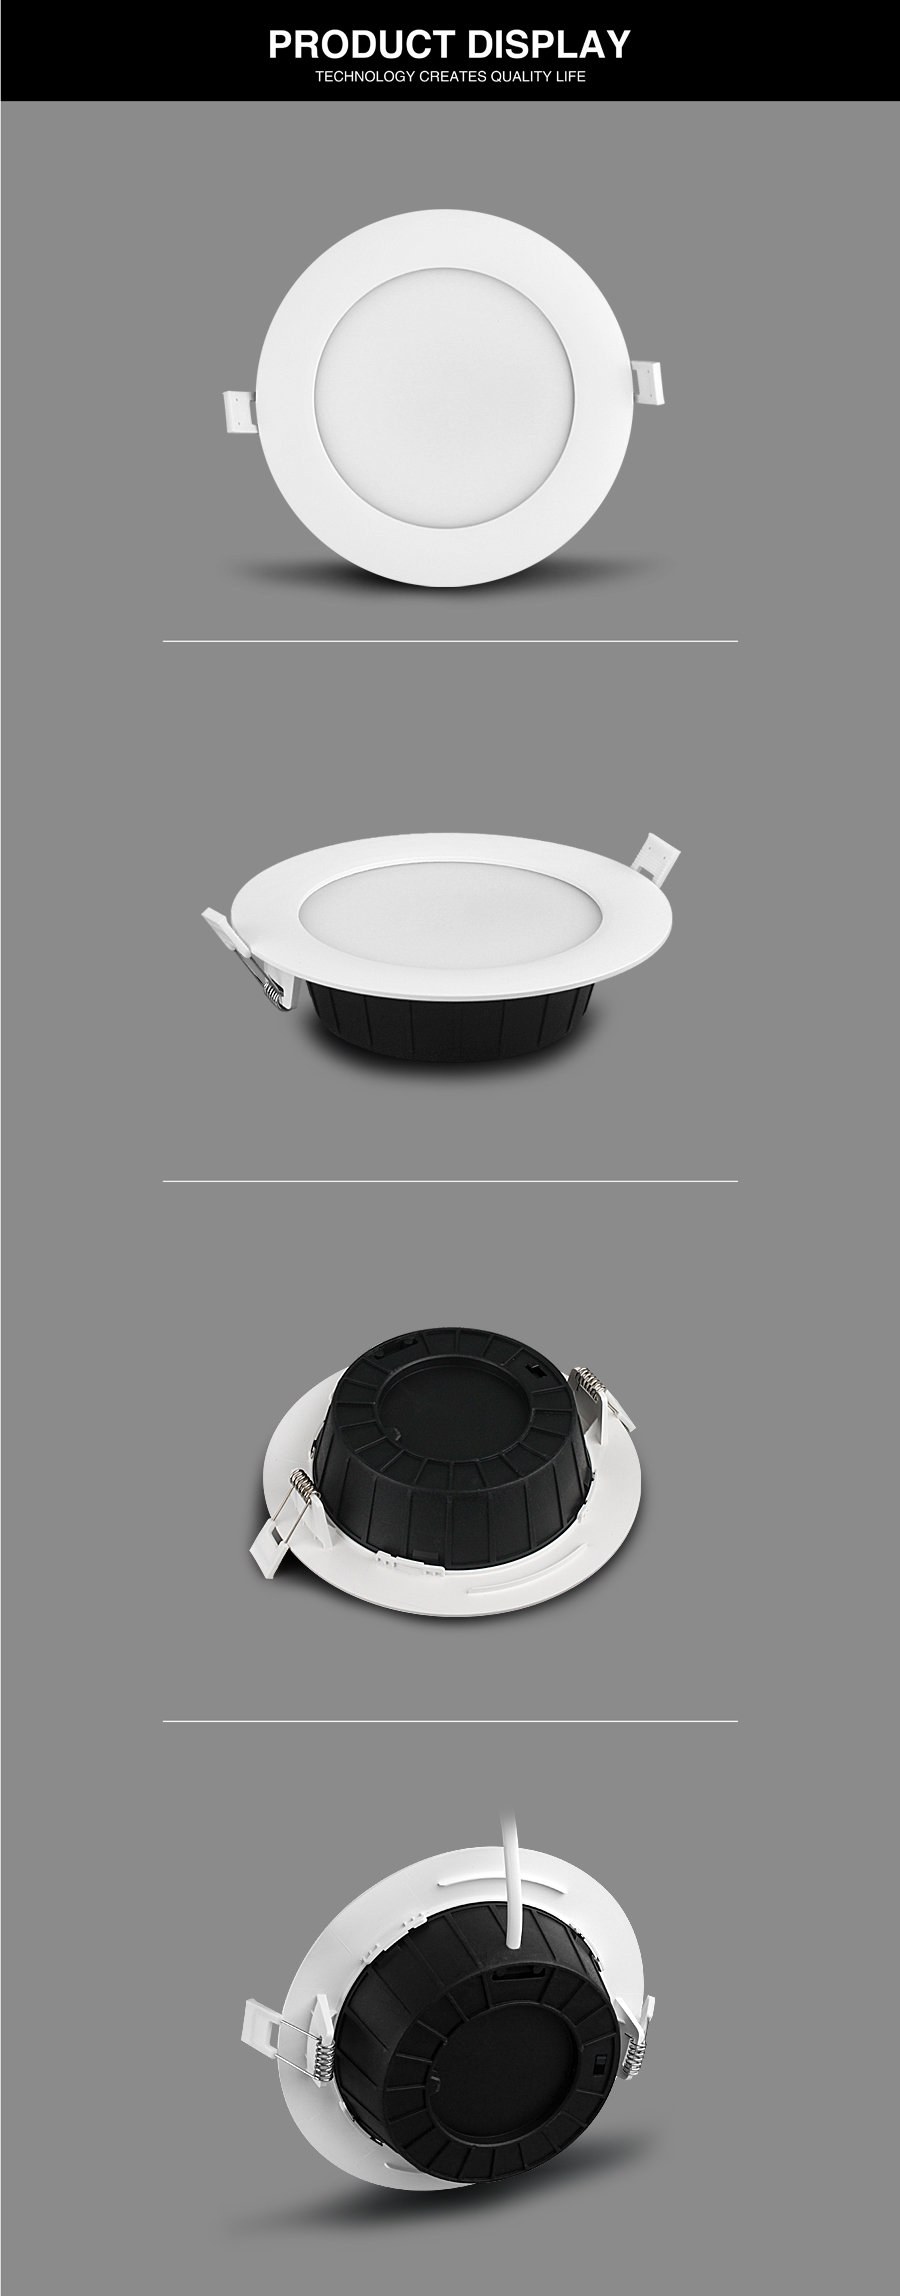 ADAYO led ceiling downlights recessed ceiling downlight